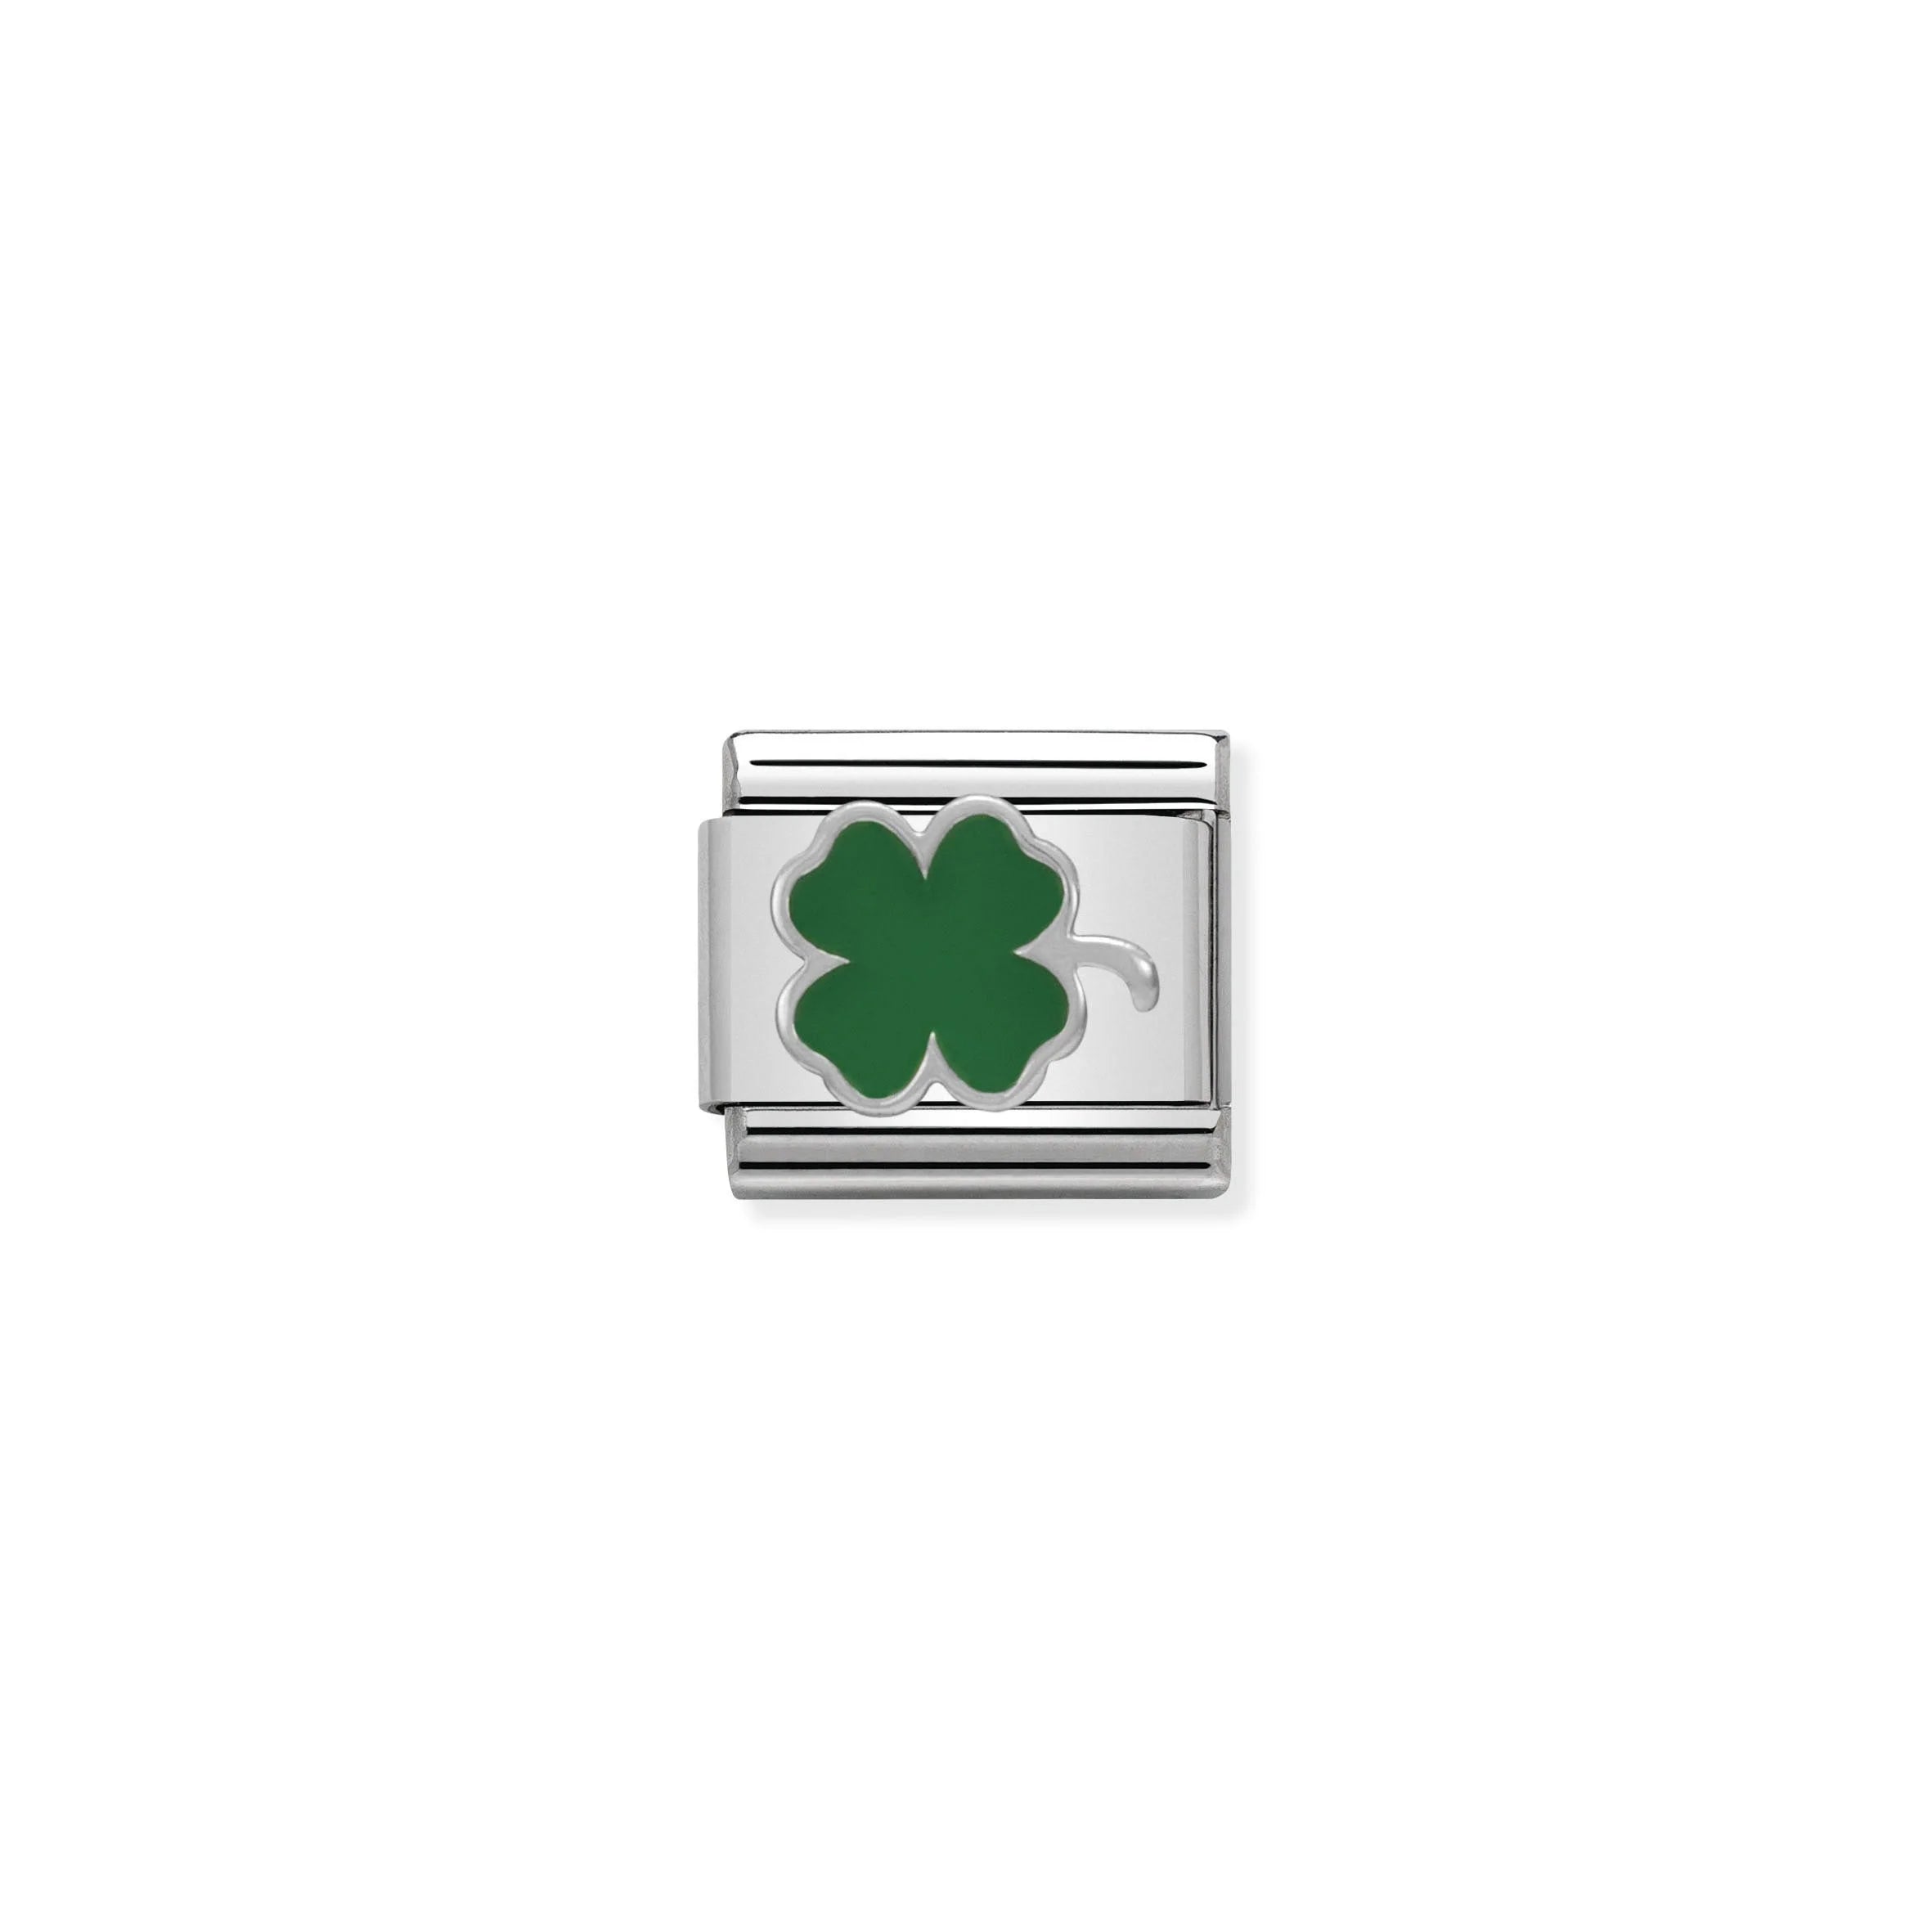 Green clover in silver and enamel